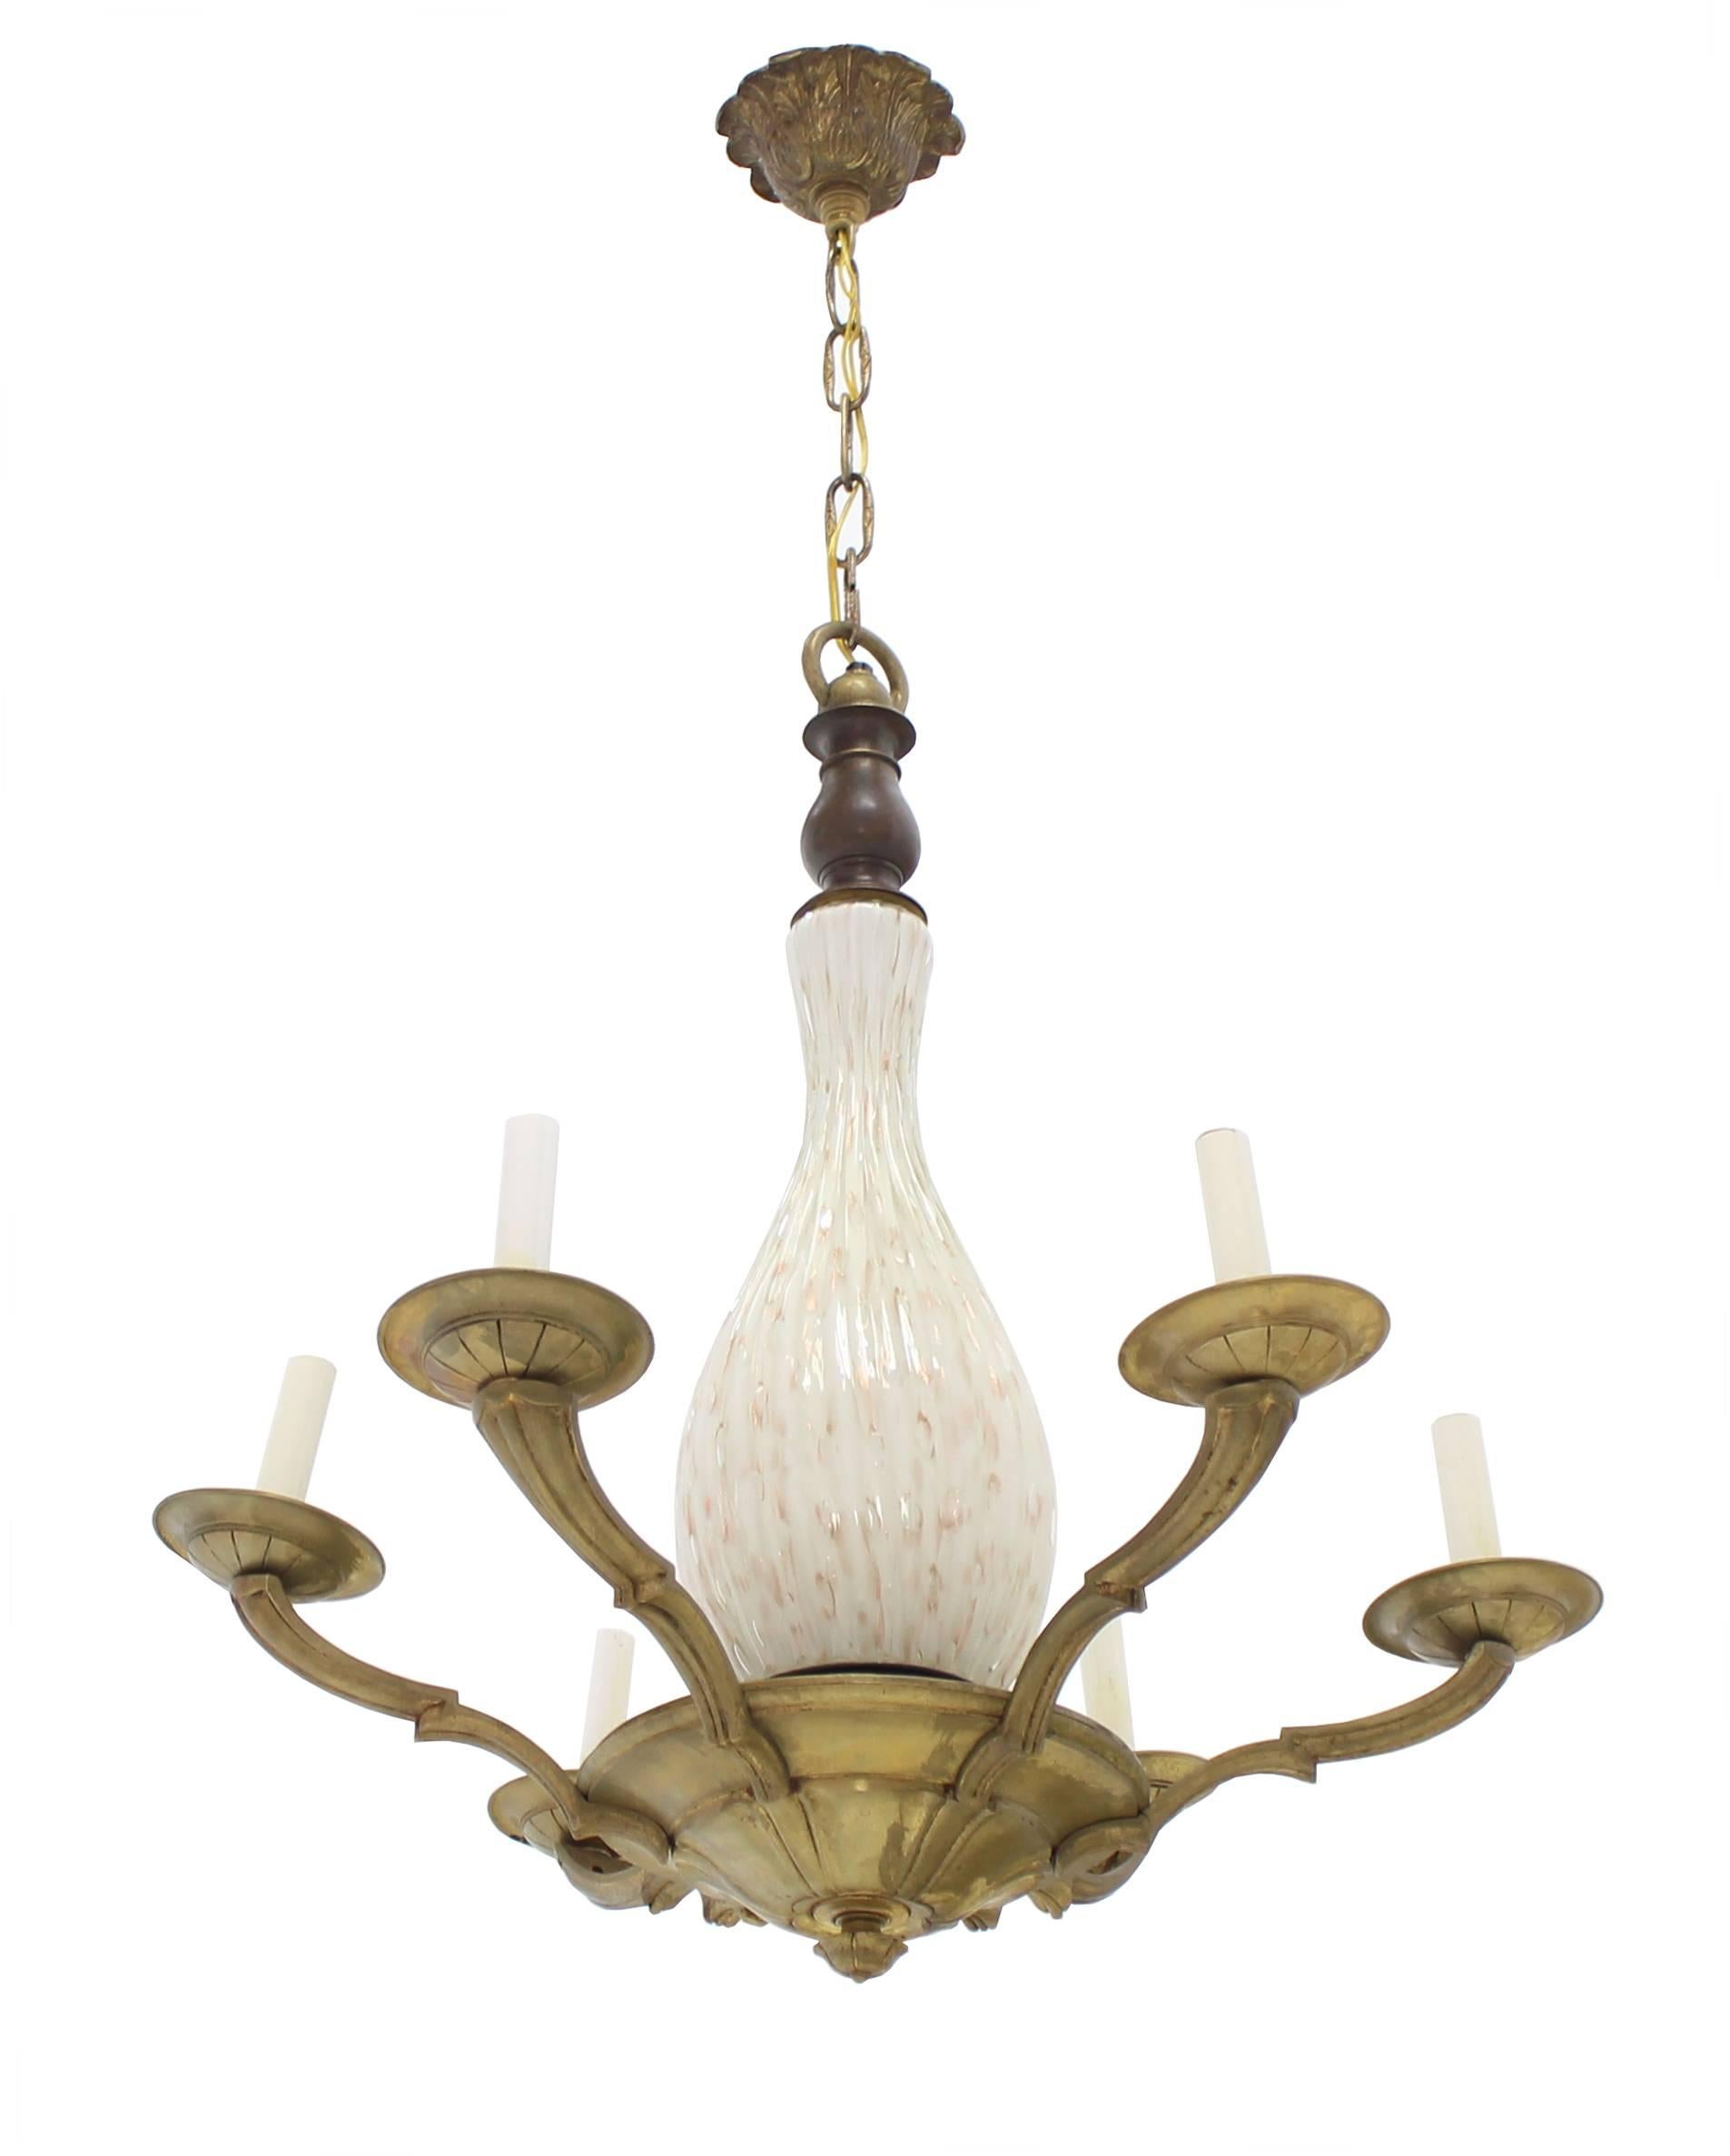 American Brass and Murano Glass 6 Arms Light Fixture Chandelier For Sale